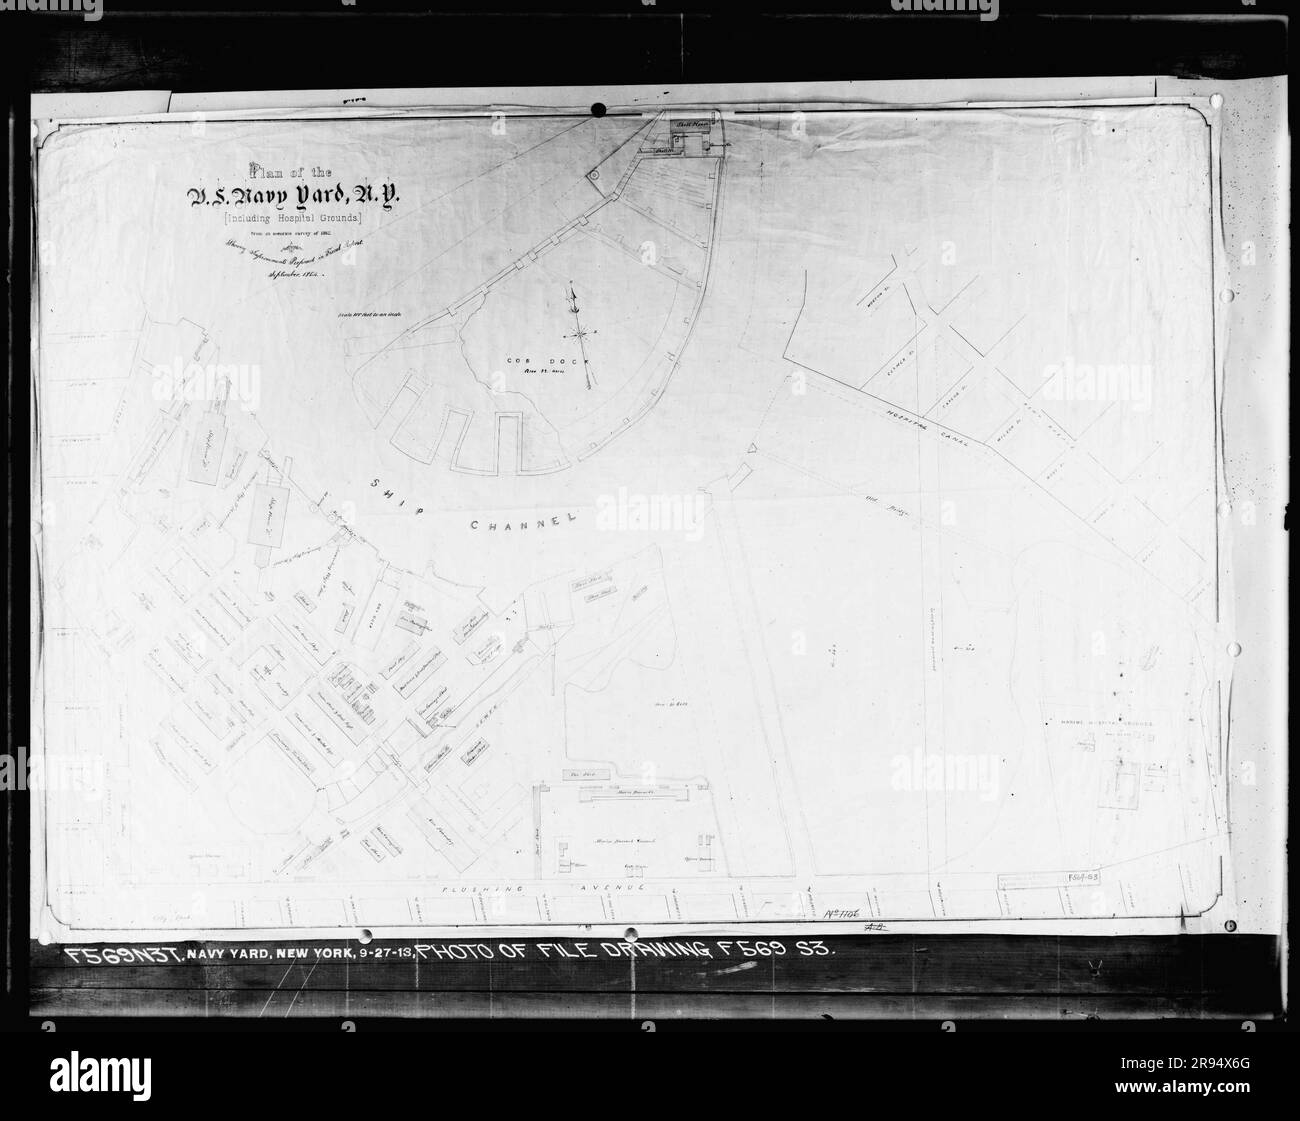 Photo of File Drawing F569 S3. Glass Plate Negatives of the Construction and Repair of Buildings, Facilities, and Vessels at the New York Navy Yard. Stock Photo